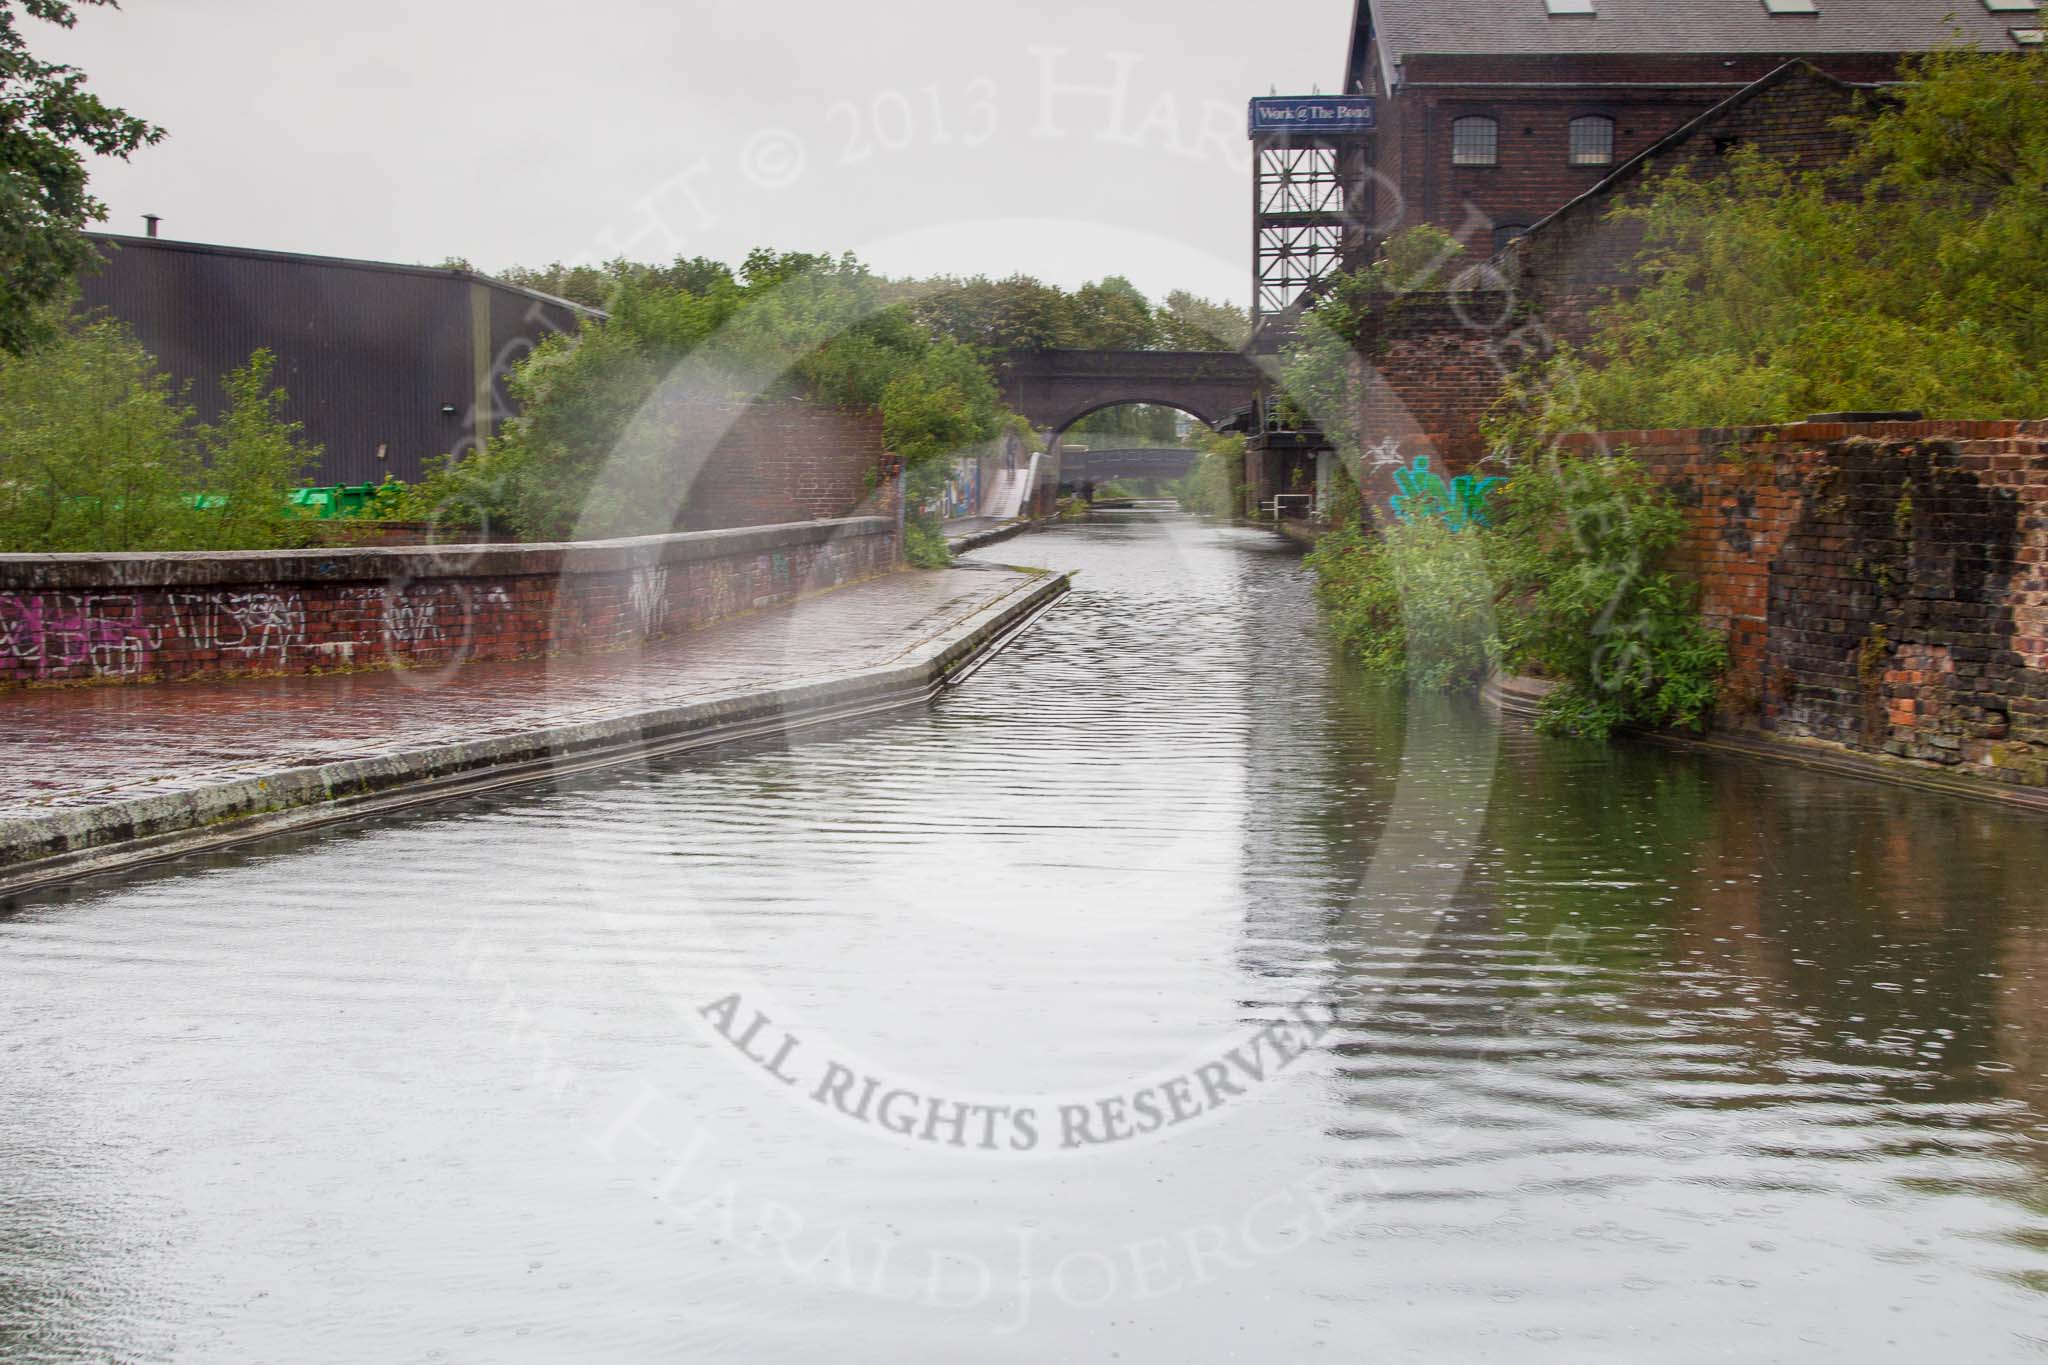 BCN Marathon Challenge 2014: Aqueduct on the Grand Union (Warwich & Birmingham) Canal over the River Rear, near Digbeth Junction..
Birmingham Canal Navigation,


United Kingdom,
on 23 May 2014 at 16:38, image #60